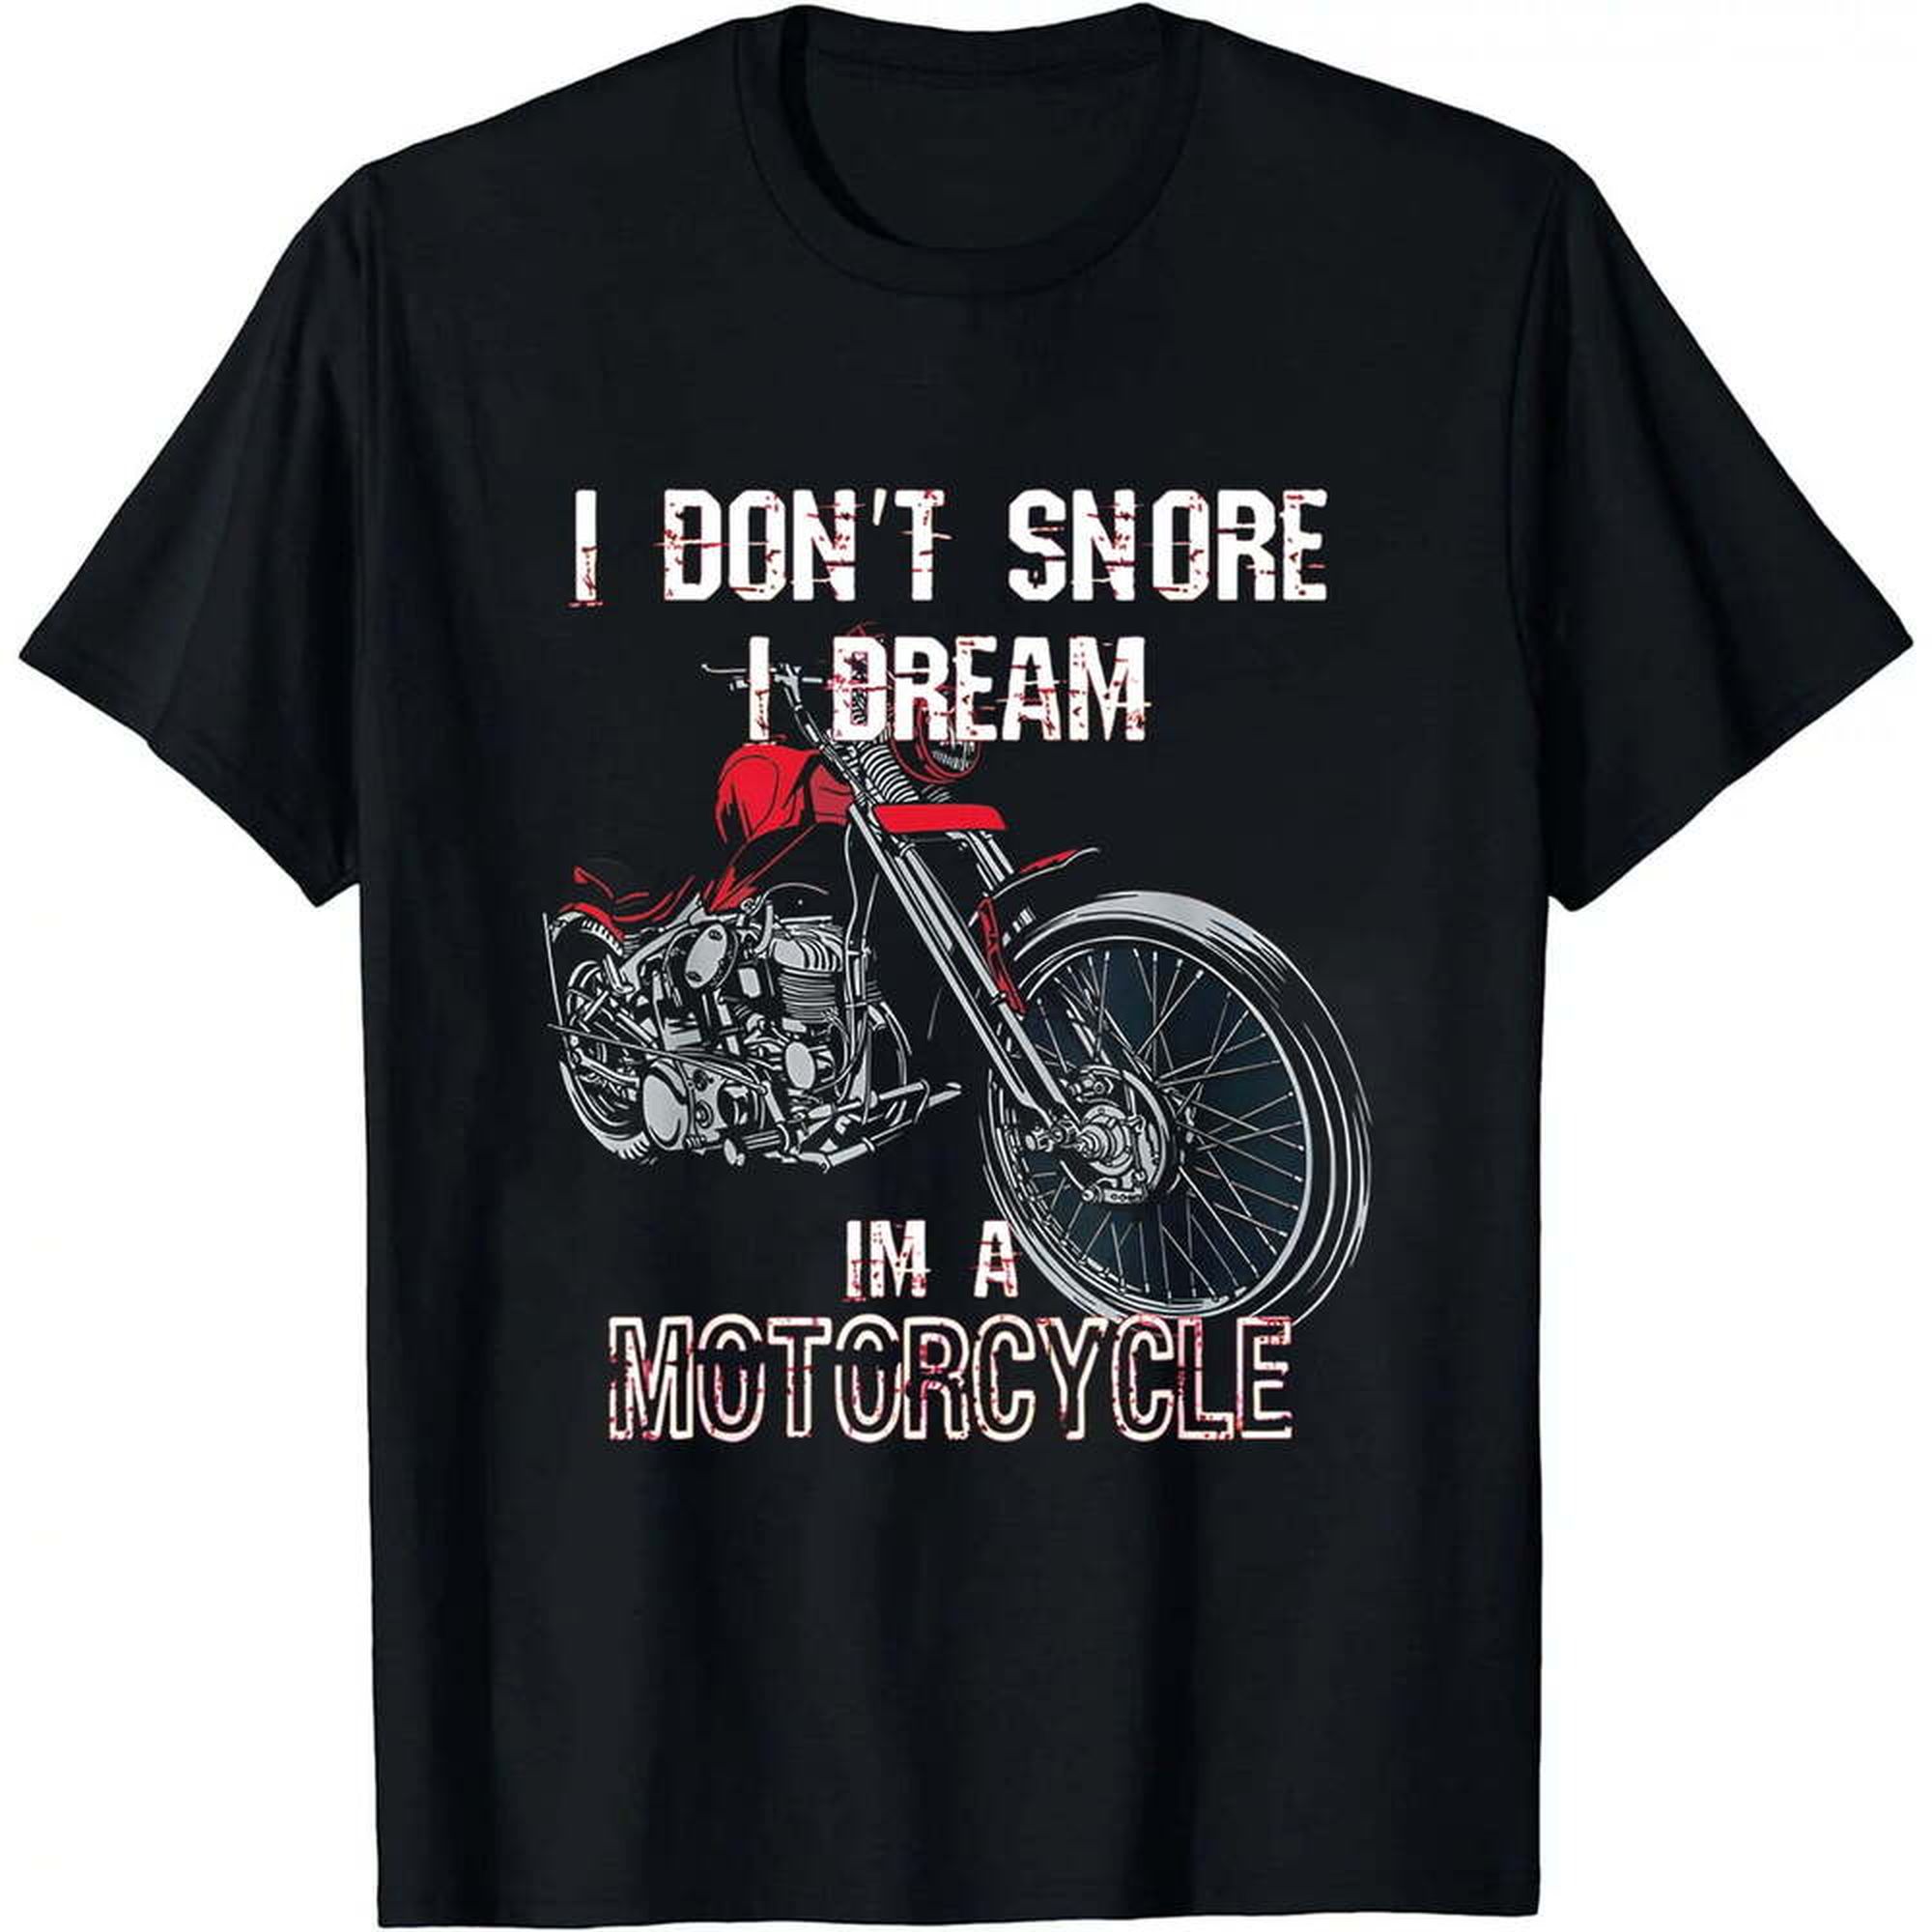 I Don't Snore I Dream I'm A Motorcycle - Motorcycle Shirt T-Shirt ...